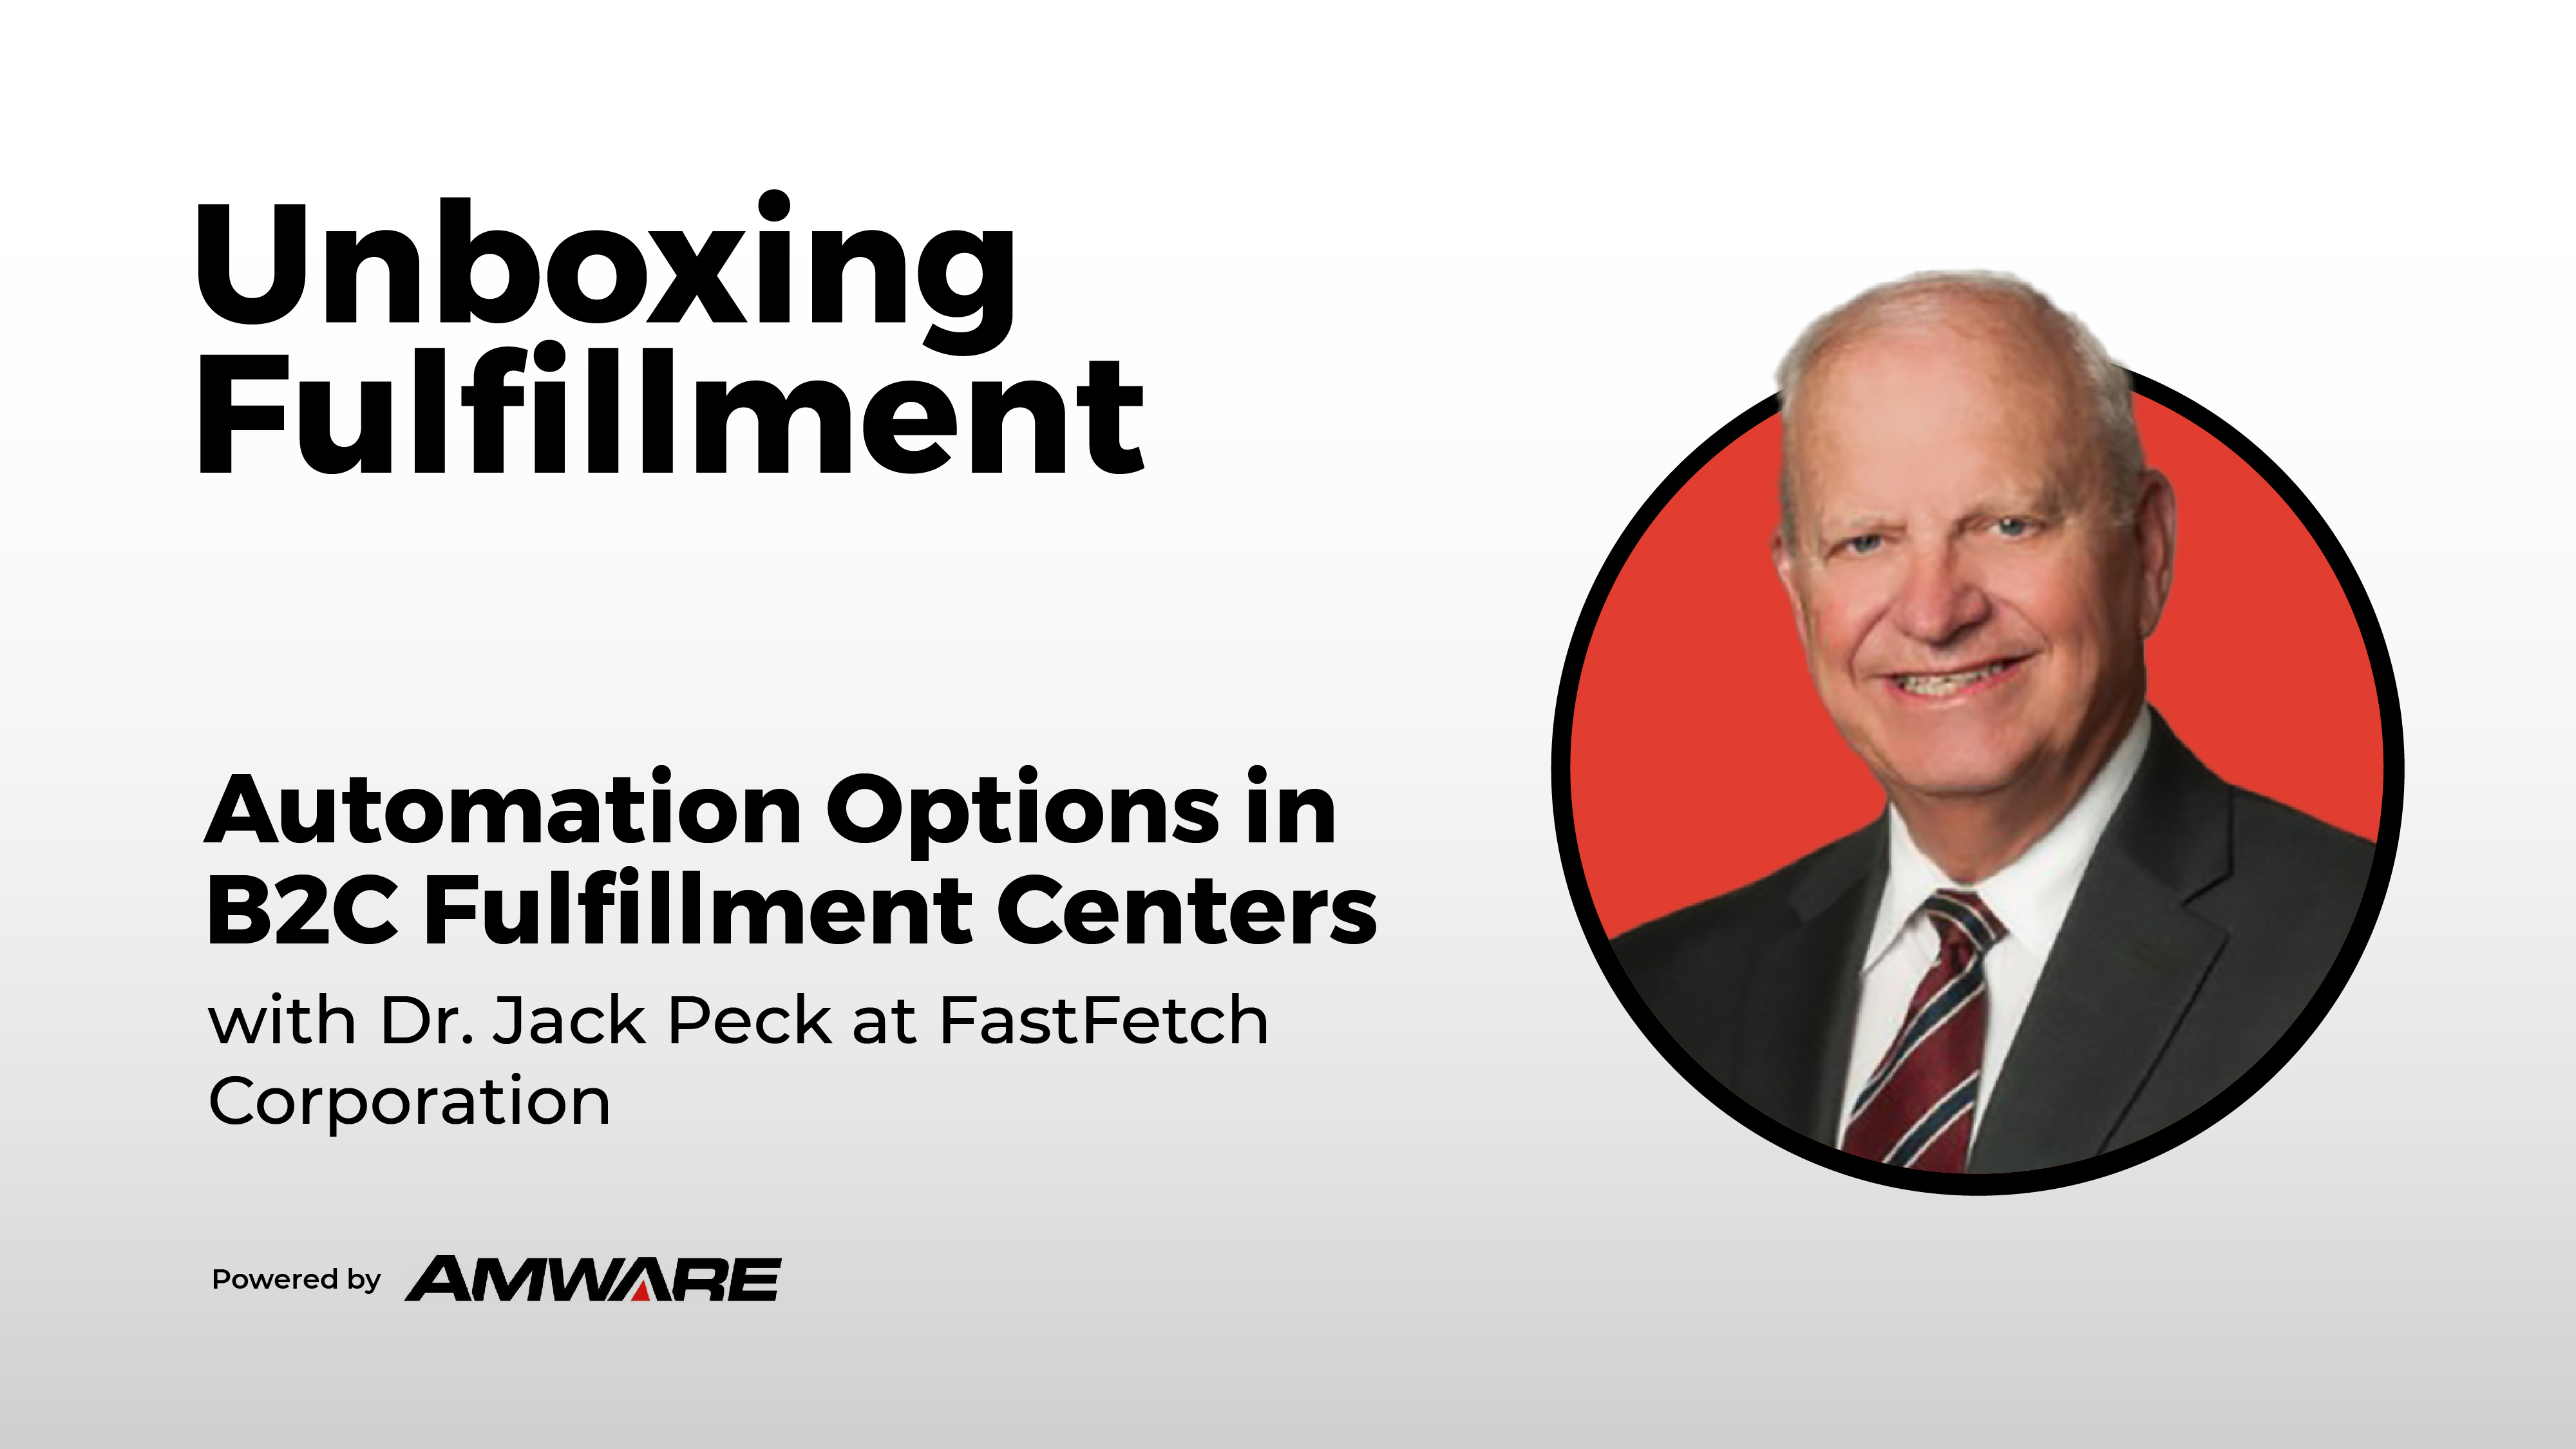 Automation Options in B2C Fulfillment Centers with Dr. Jack Peck at FastFetch Corporation